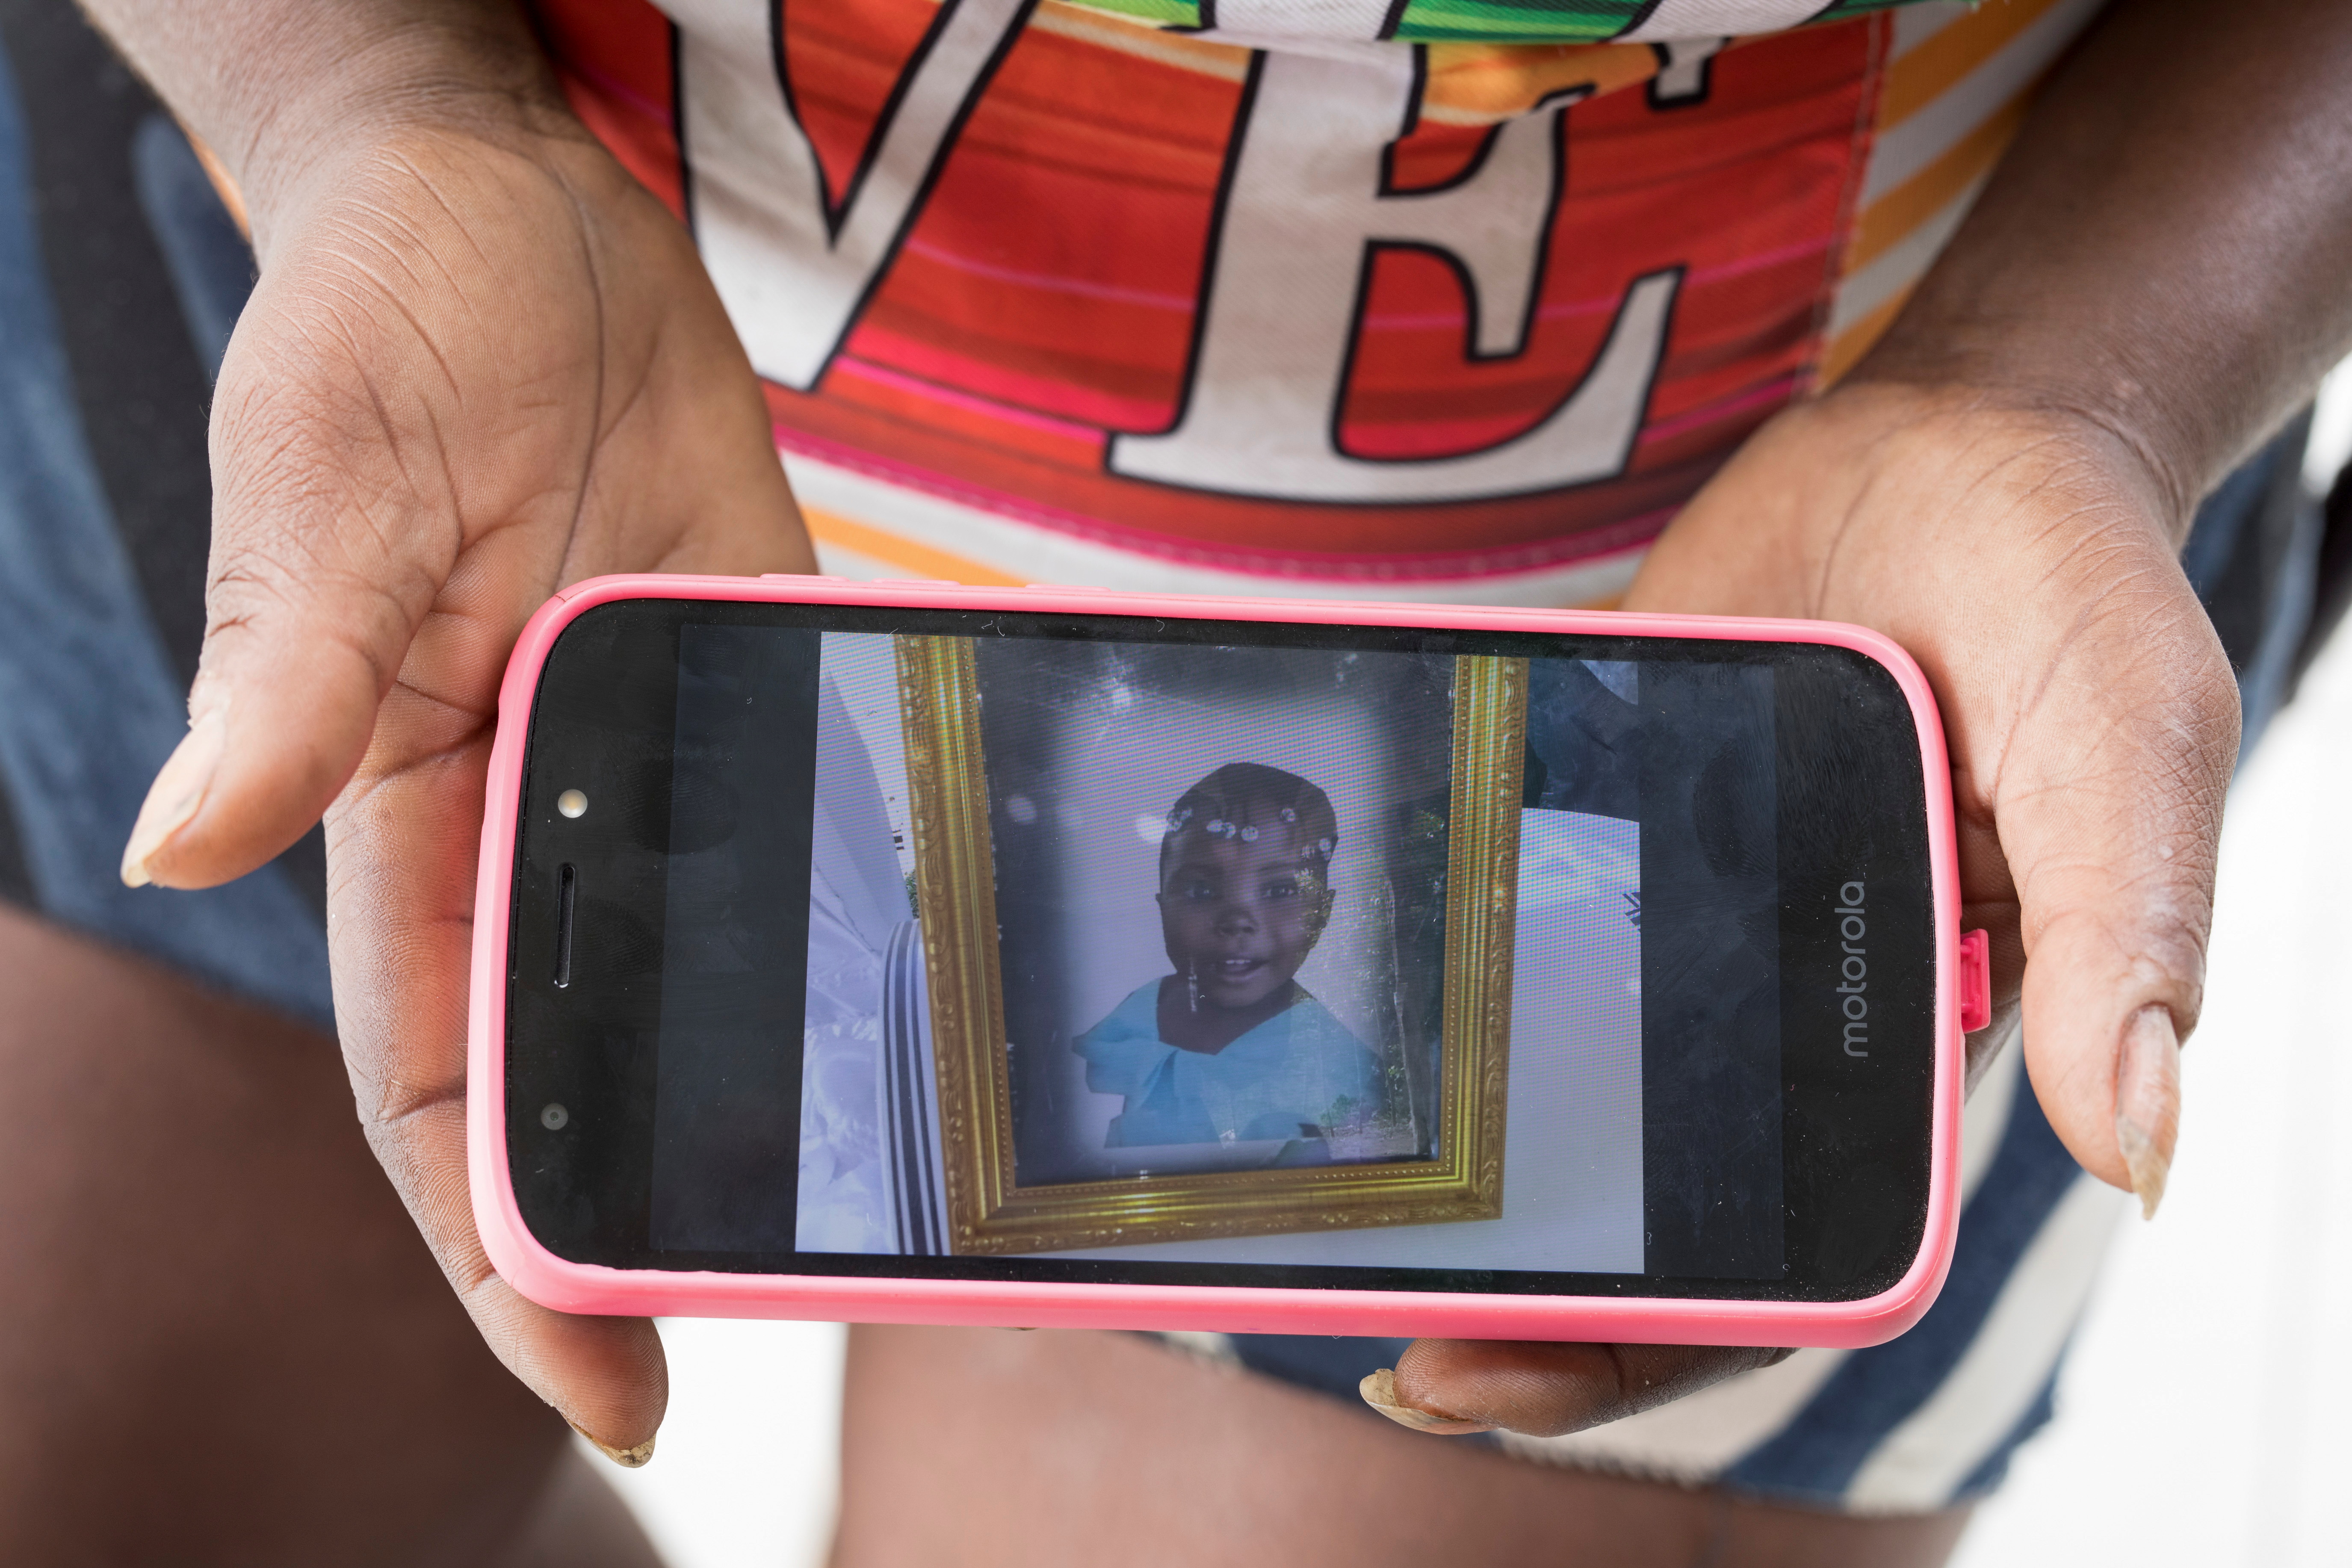 A woman who works as a peanut vendor and wants to remain anonymous, shows a photo of her five-year-old daughter Olslina Janneus, who was kidnapped at her poor neighborhood and found dead days later, during an interview with Reuters in Port-au-Prince, Haiti March 9, 2021. Picture taken March 9, 2021. REUTERS/Valerie Baeriswyl